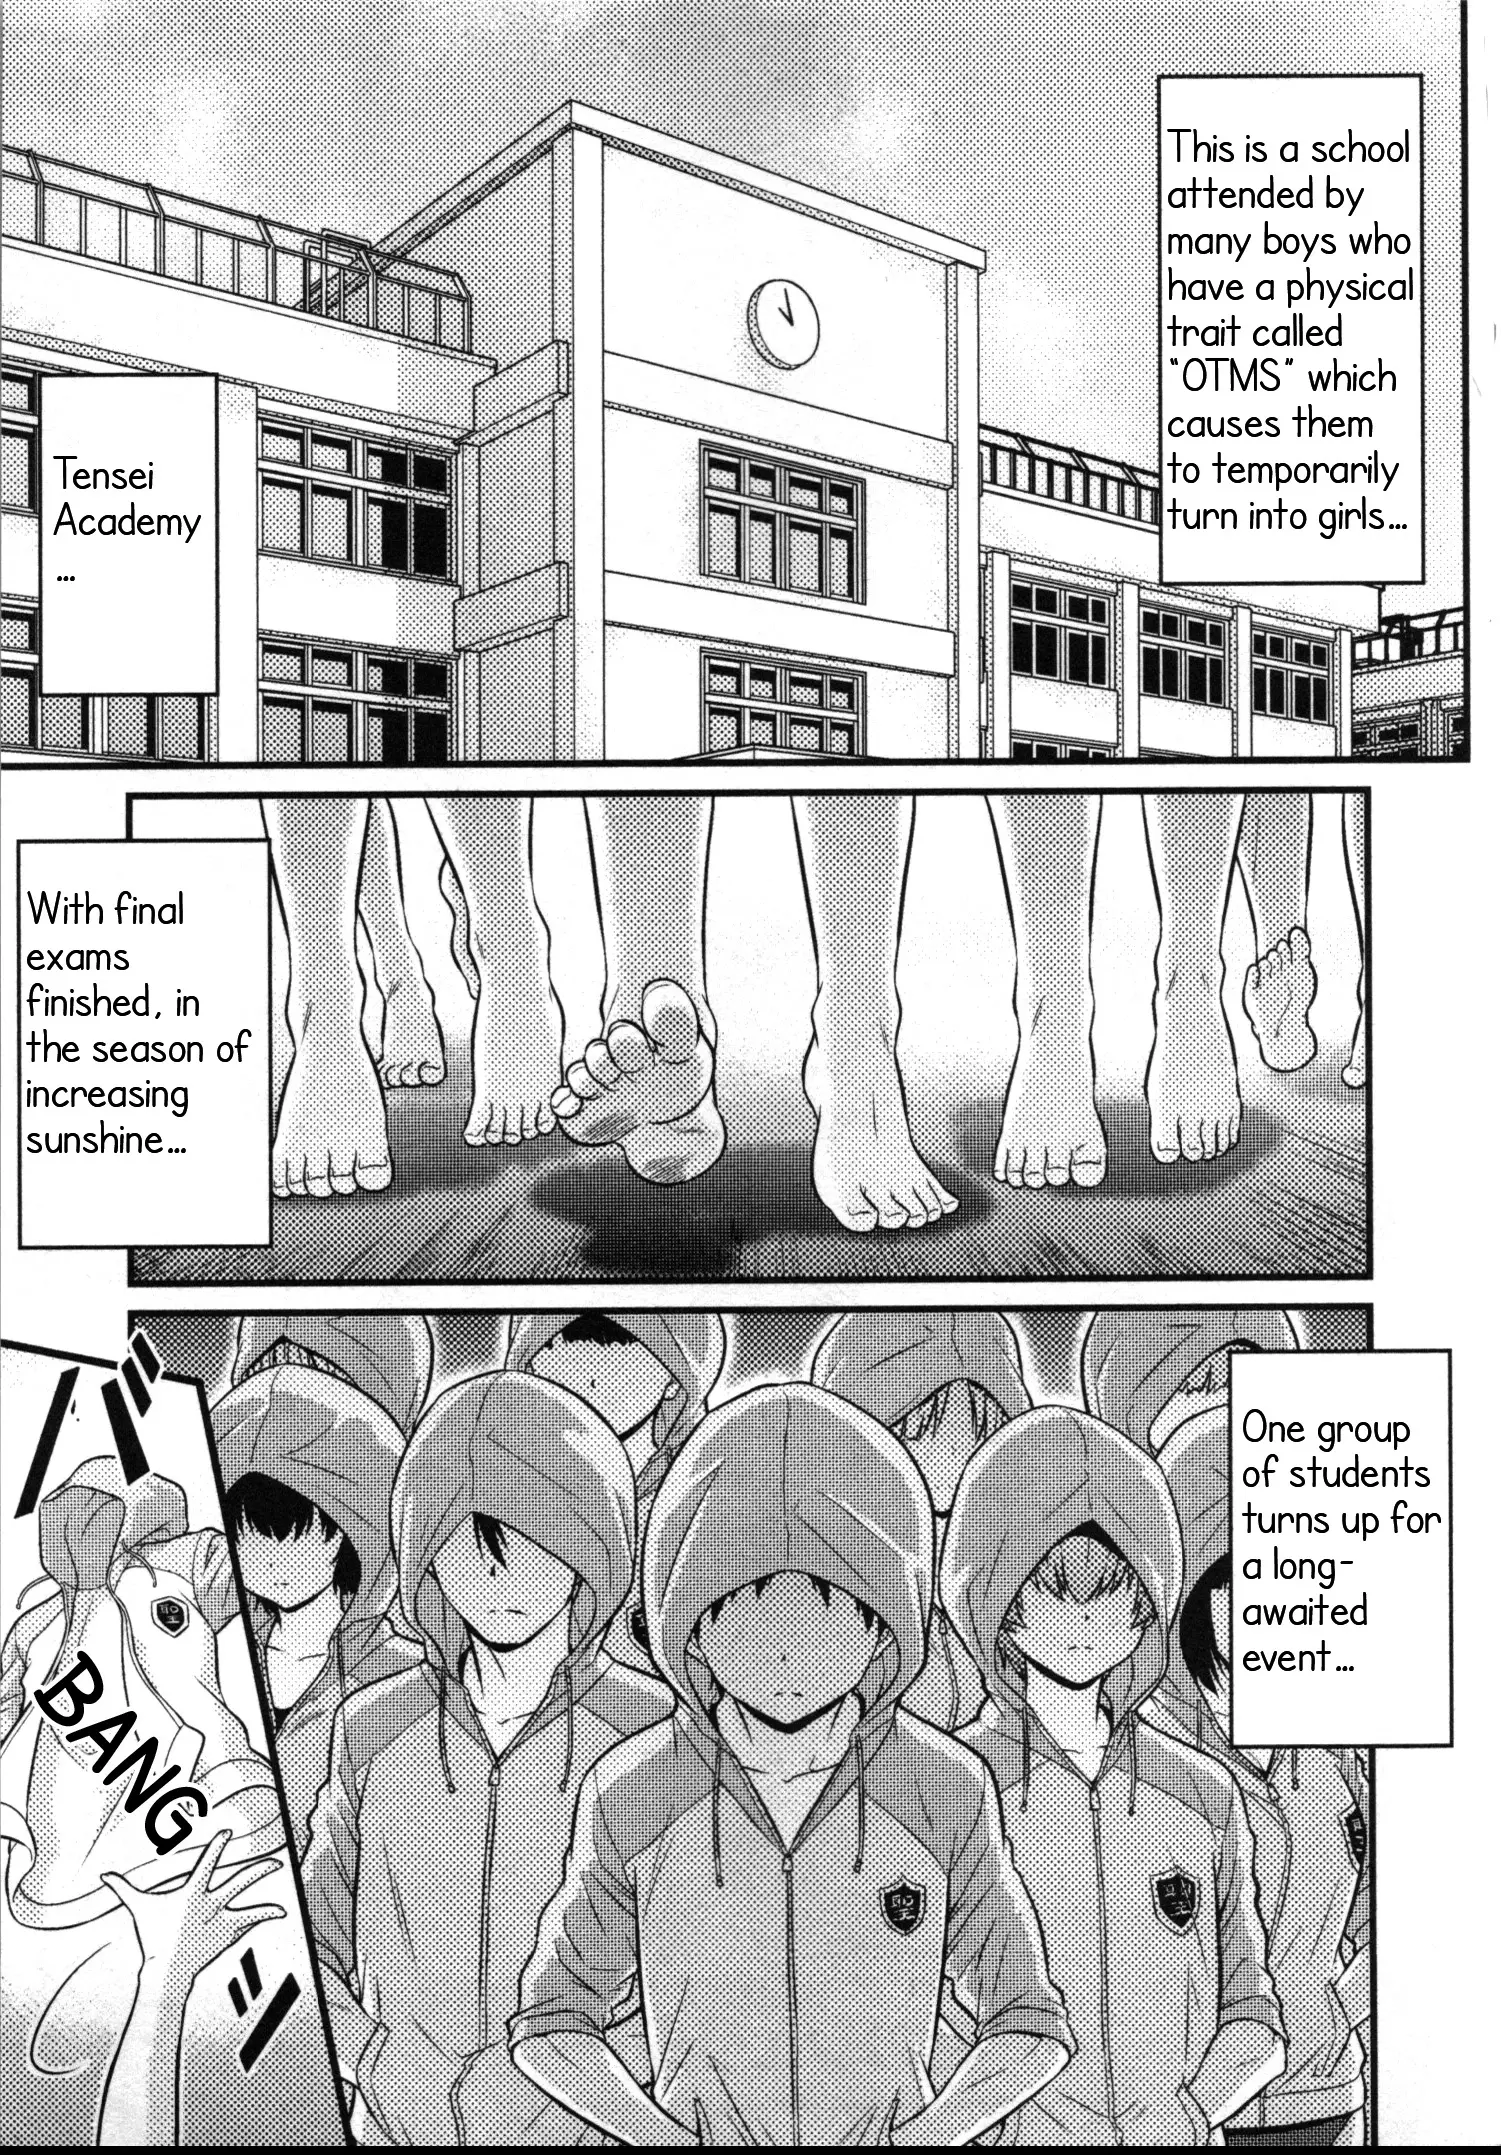 Daily Life In Ts School - 11 page 1-5984ce7c